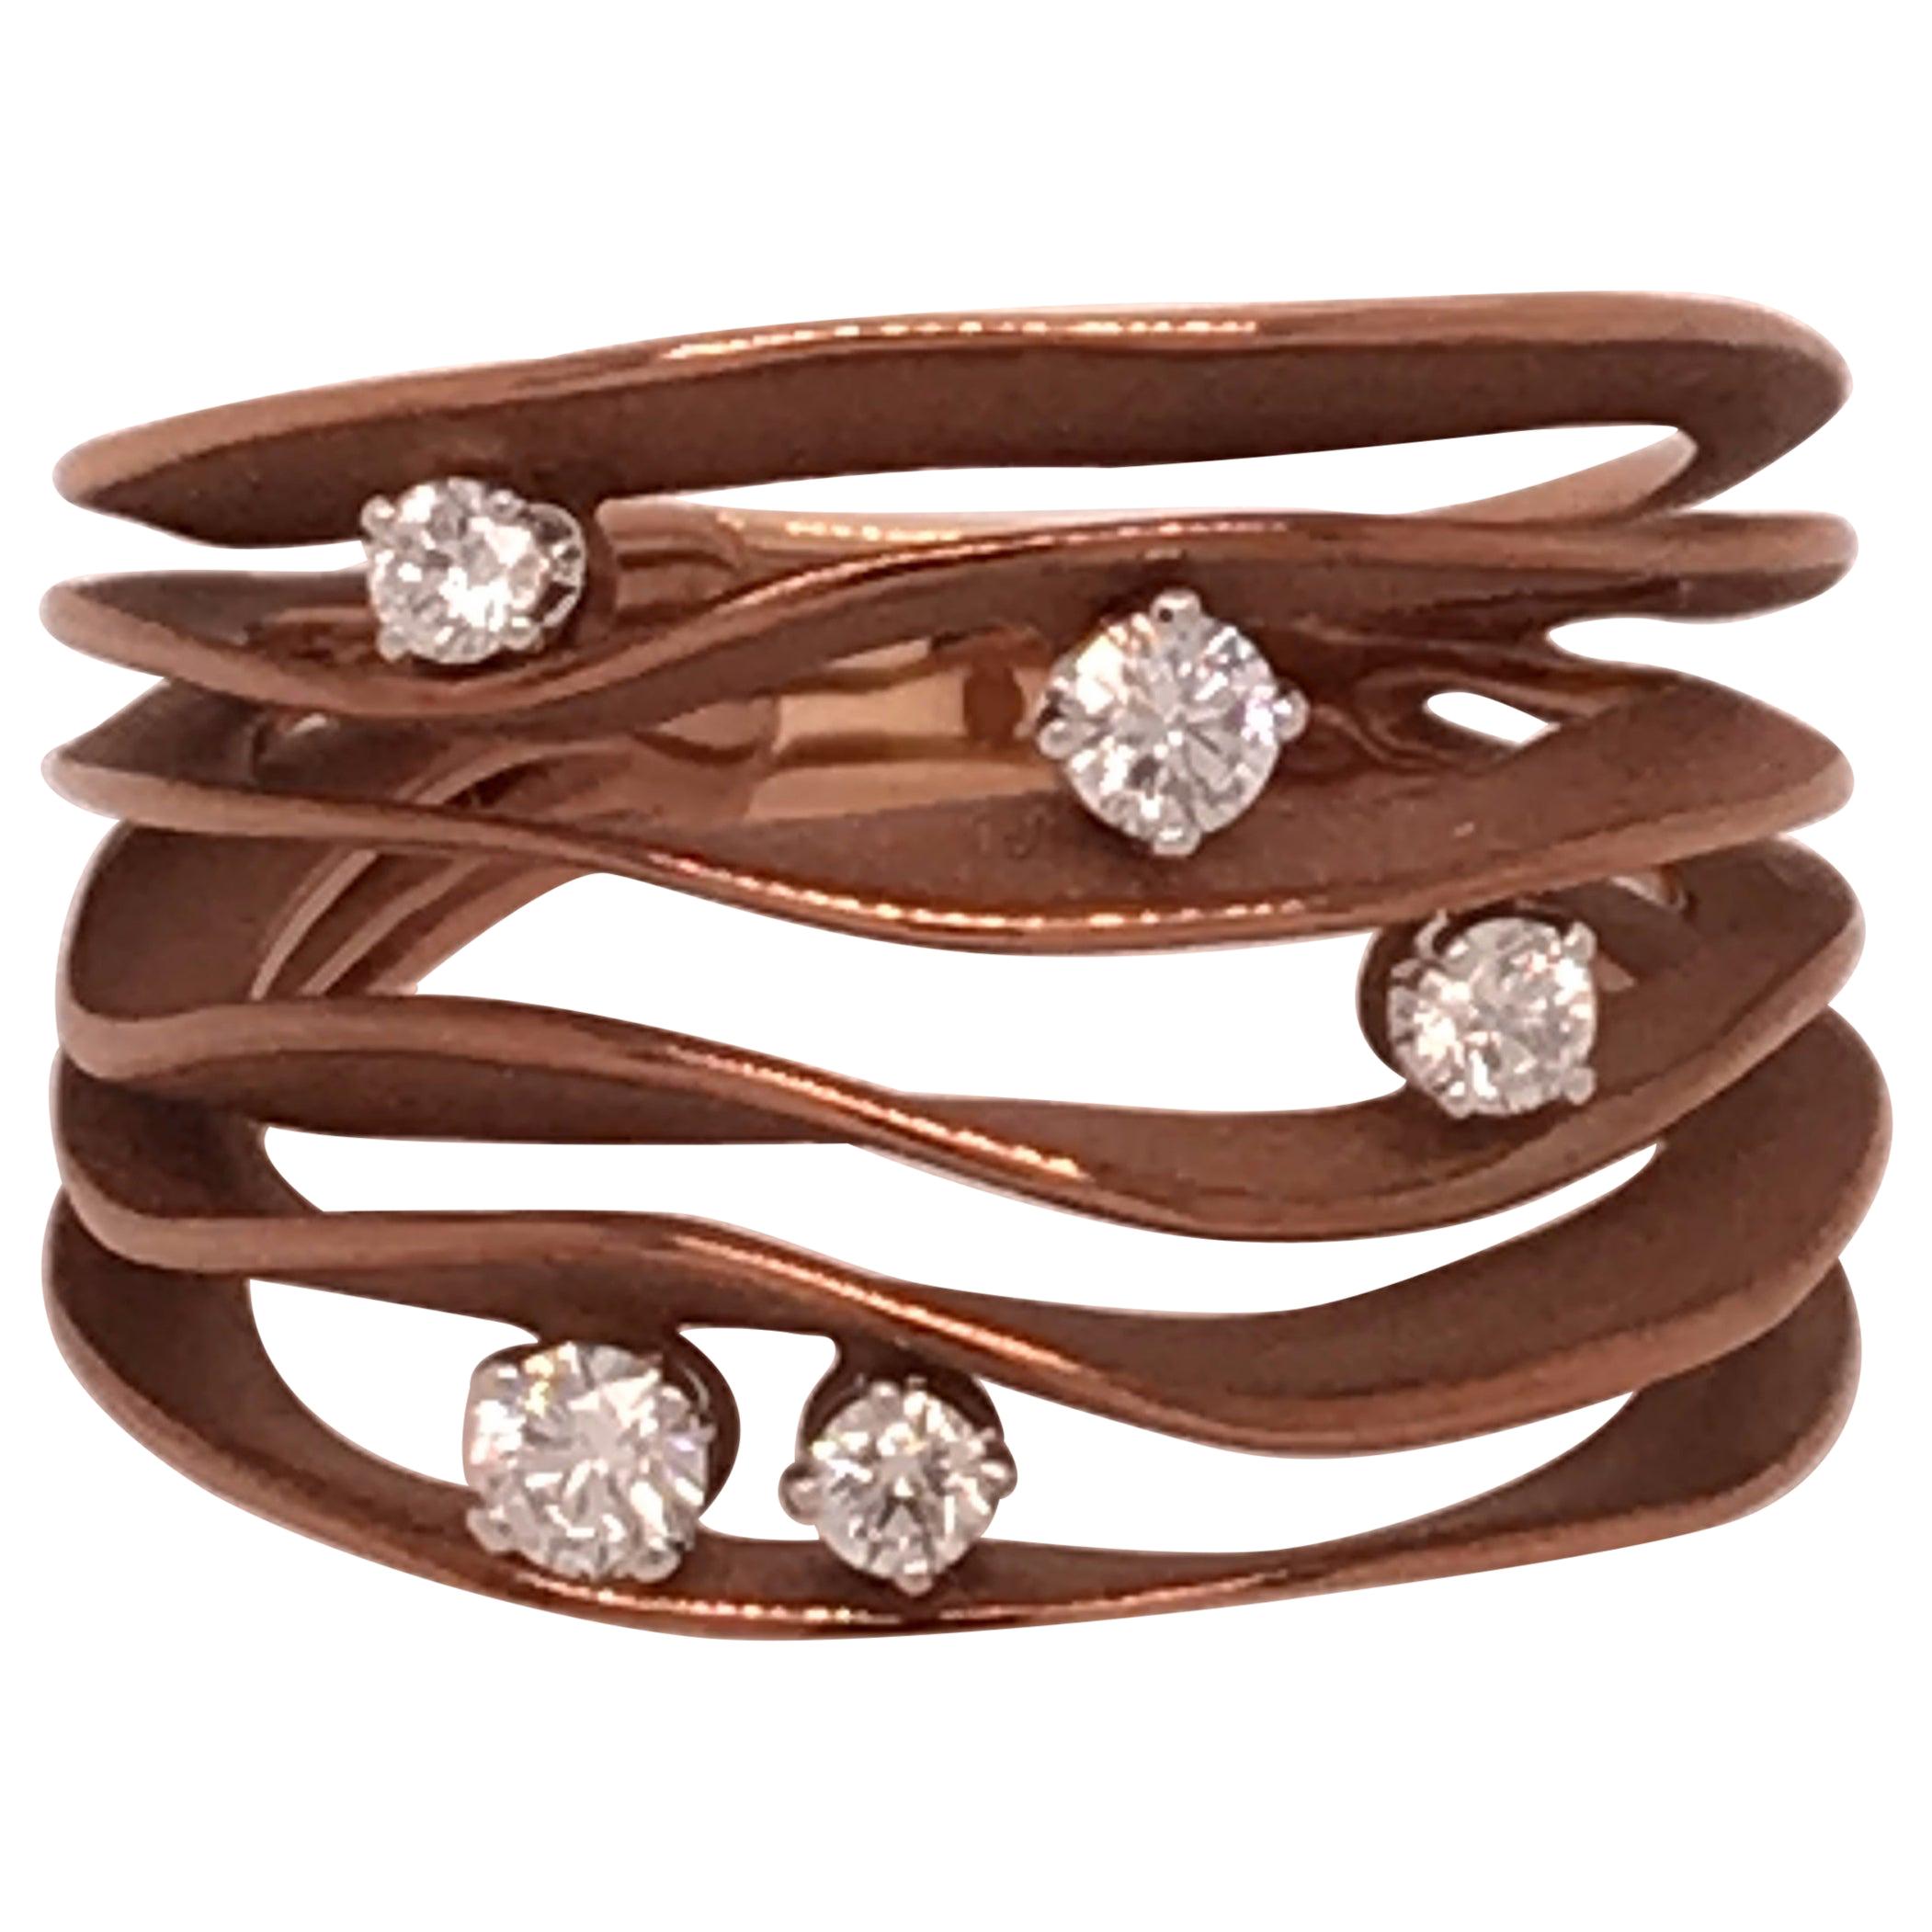 For Sale:  Annamaria Cammilli "Dune" Ring with Five Diamonds in 18K Brown Chocolate Gold